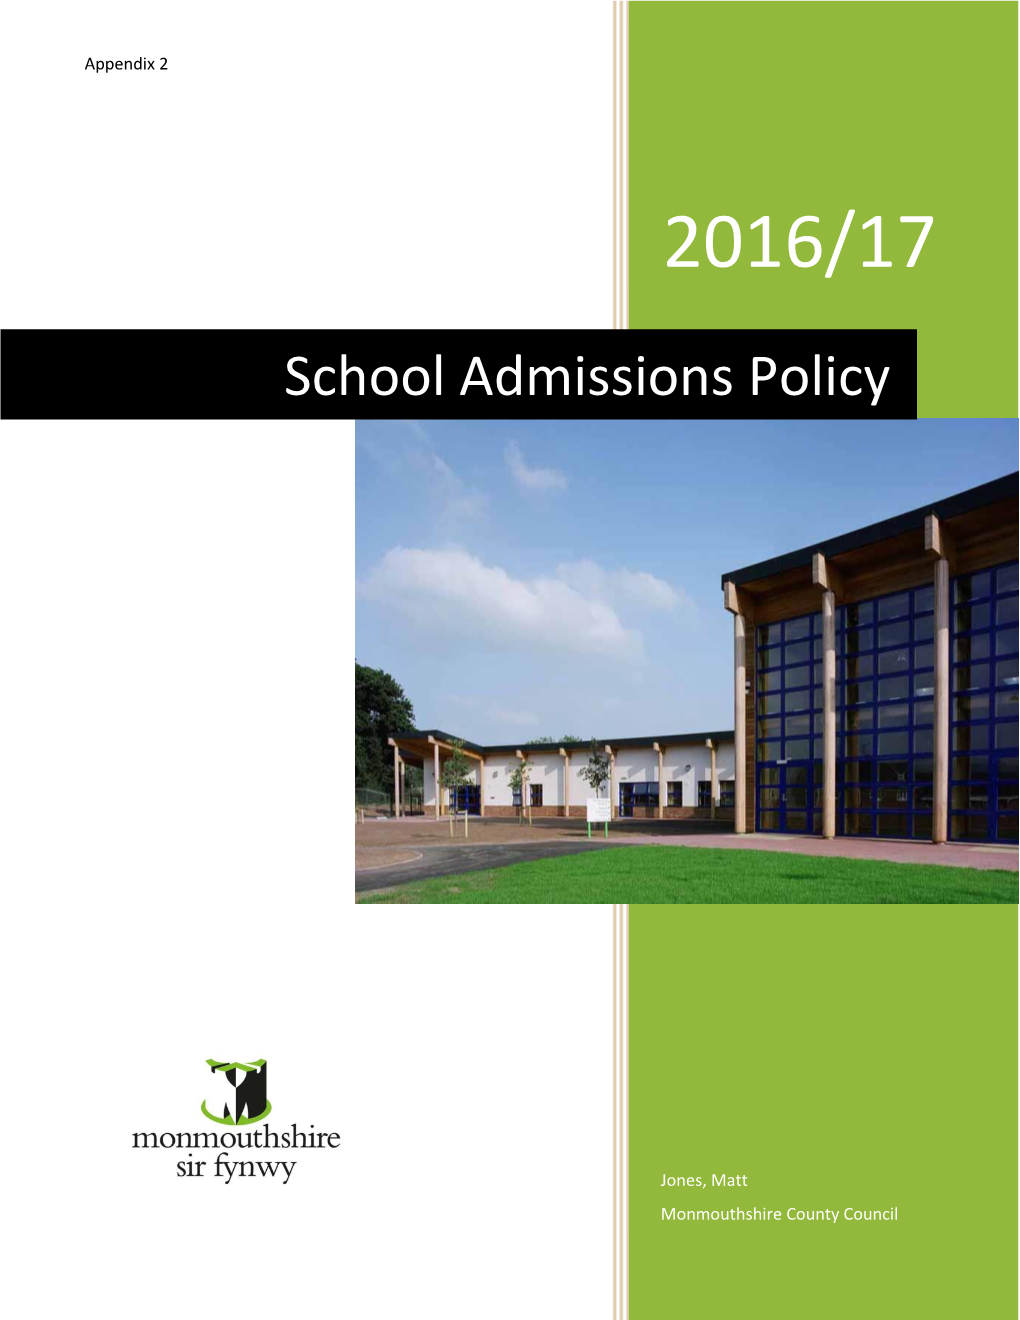 School Admissions Policy